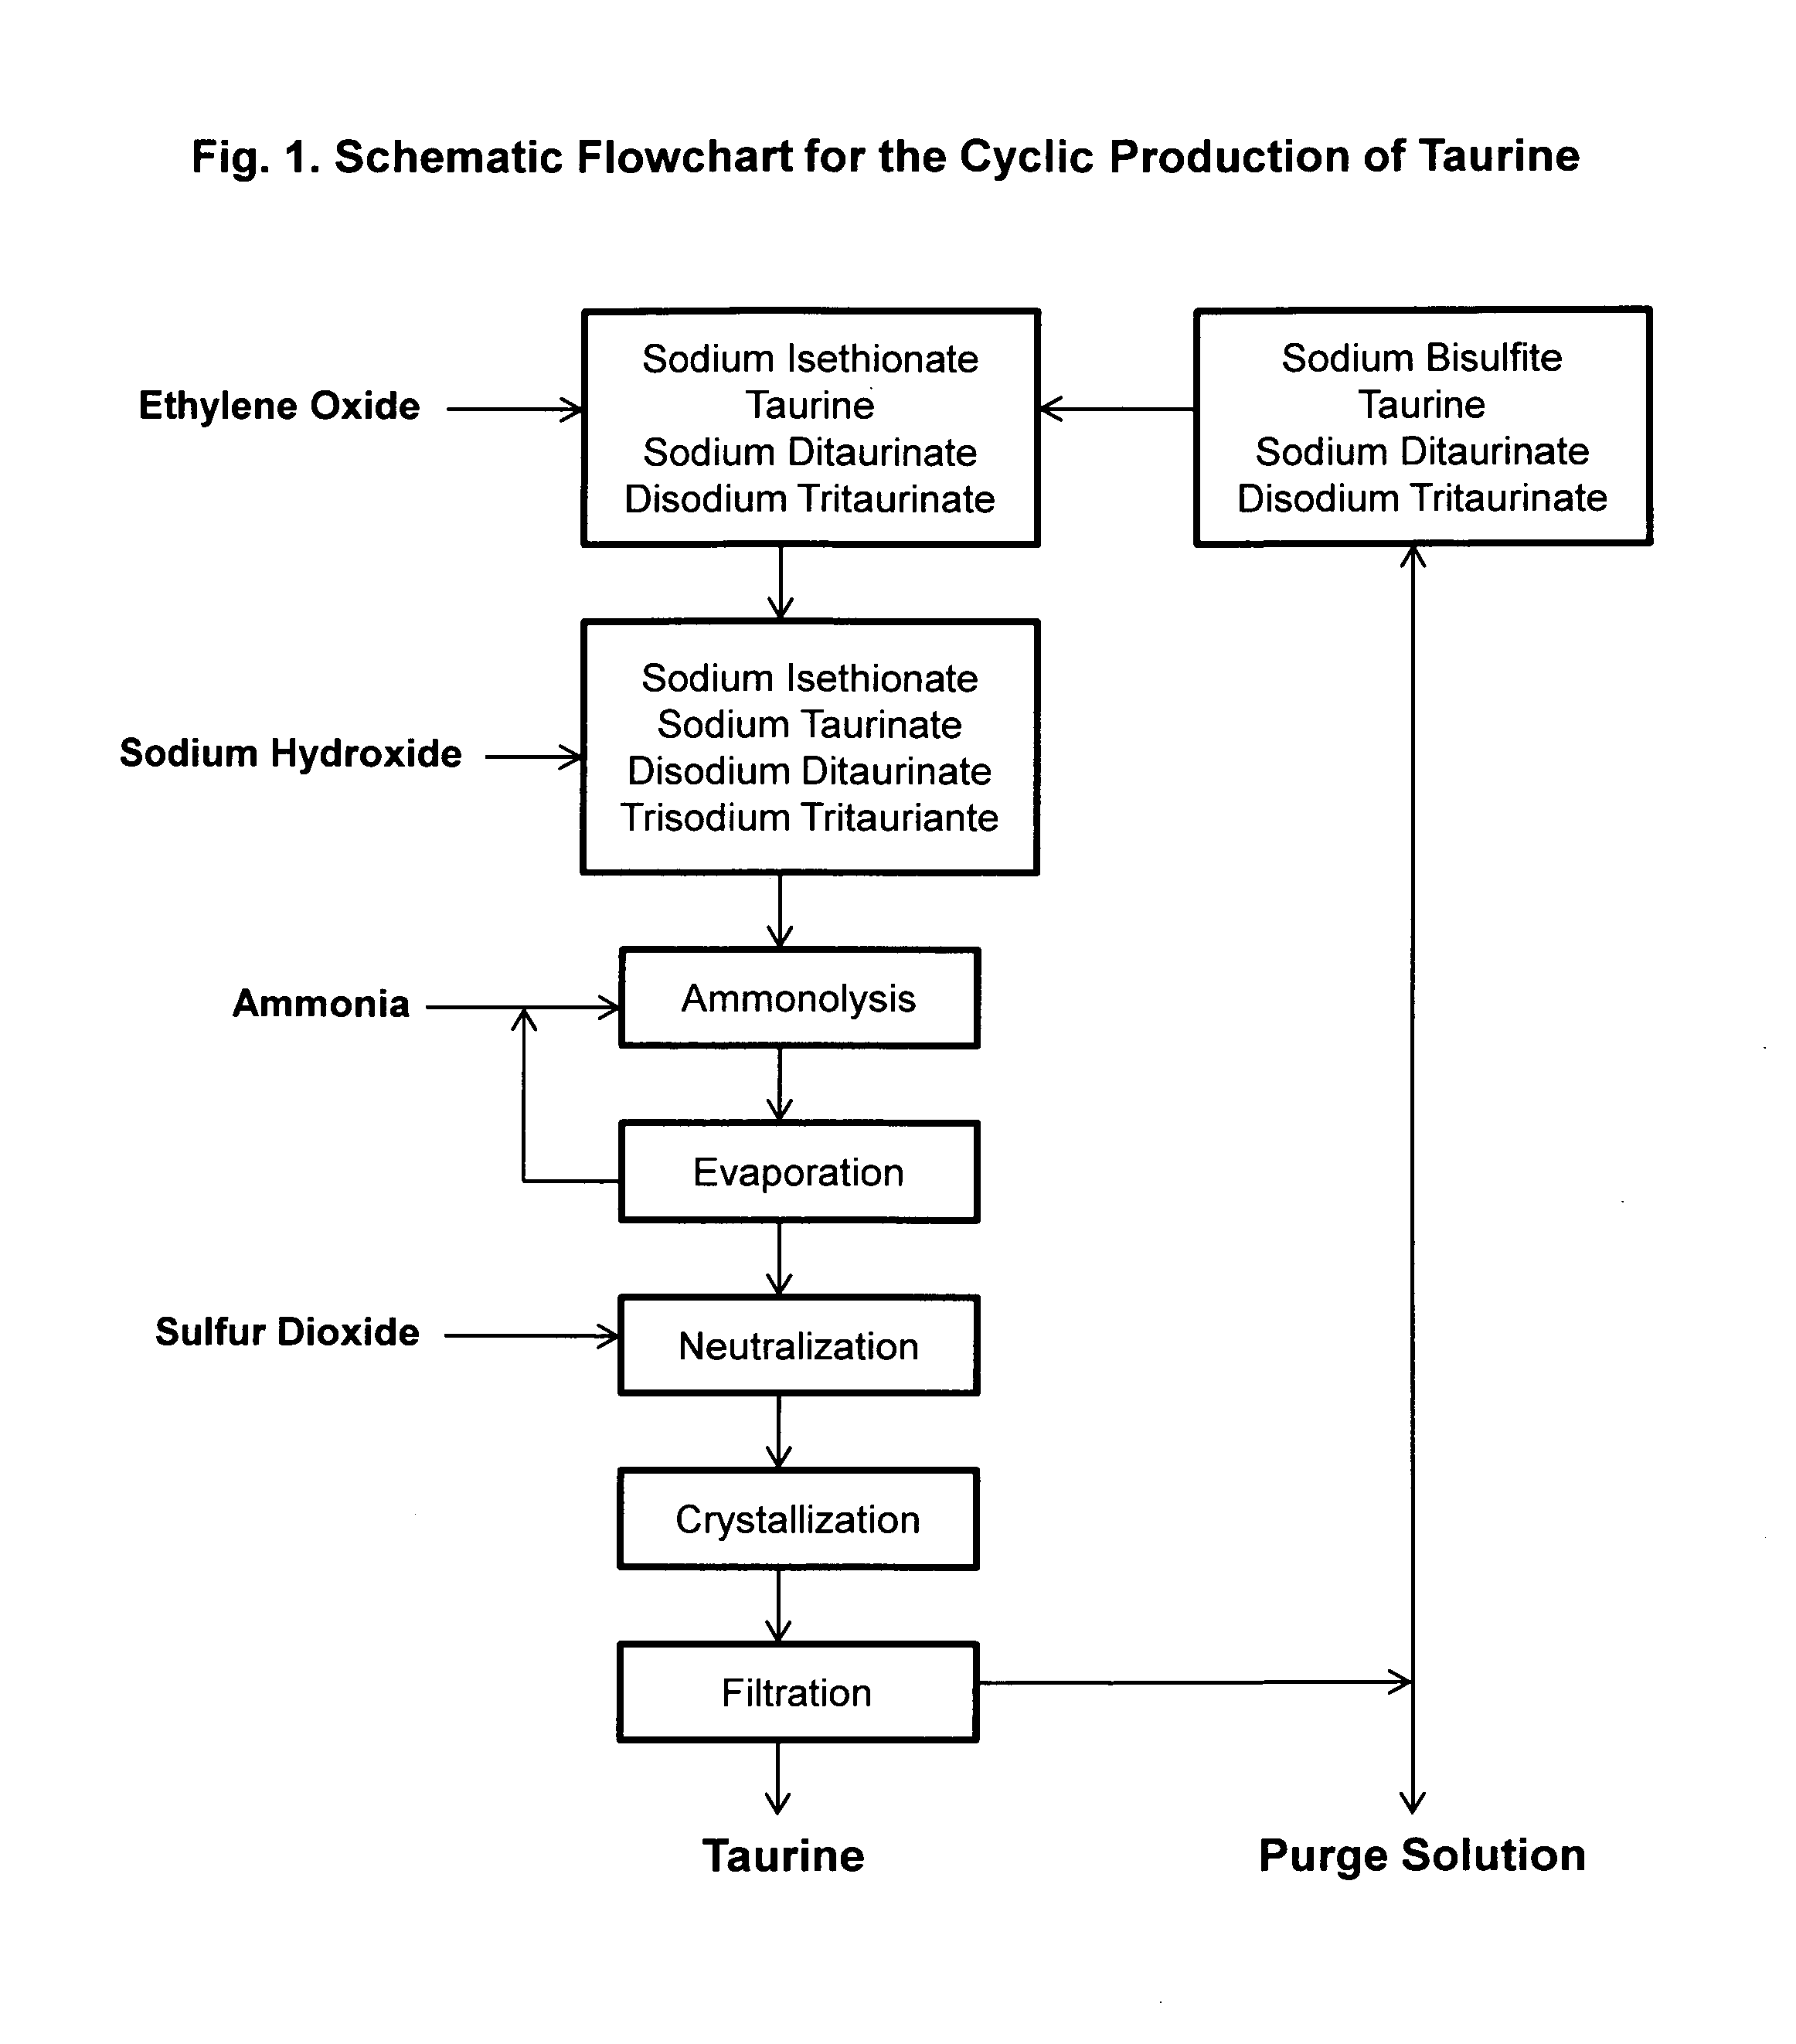 Cyclic process for the production of taurine from ethylene oxide